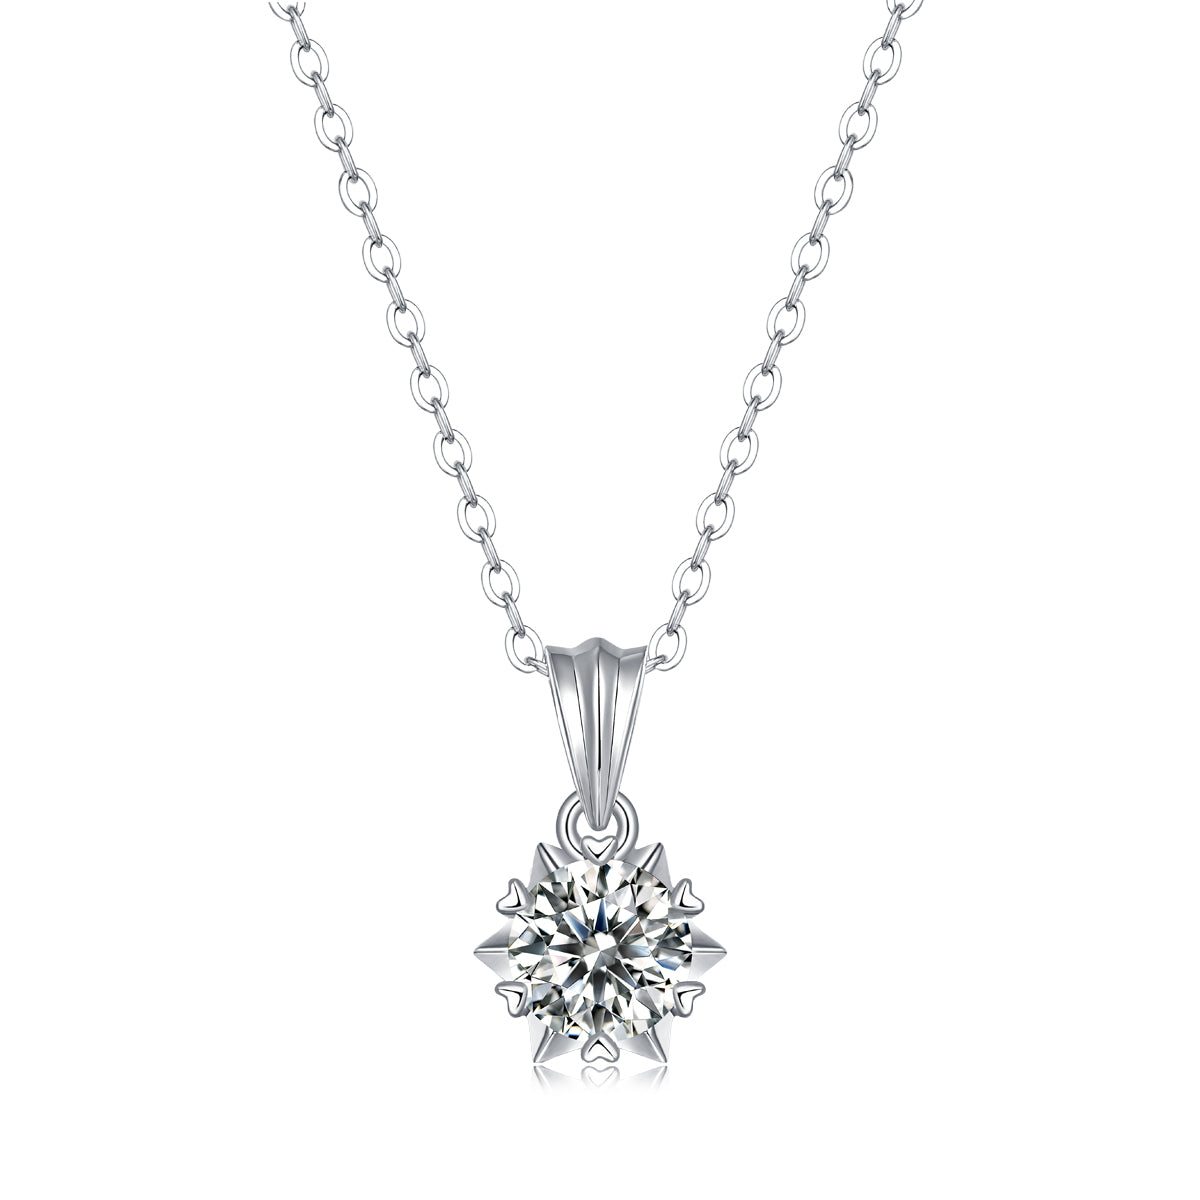 FairyLocus “Wholeheartedly” 1ct Moissanite Necklace Sterling Silver 18K White Gold Plated D Color VVS1 Clarity Brilliant Necklace FLZZNLMS25 FairyLocus